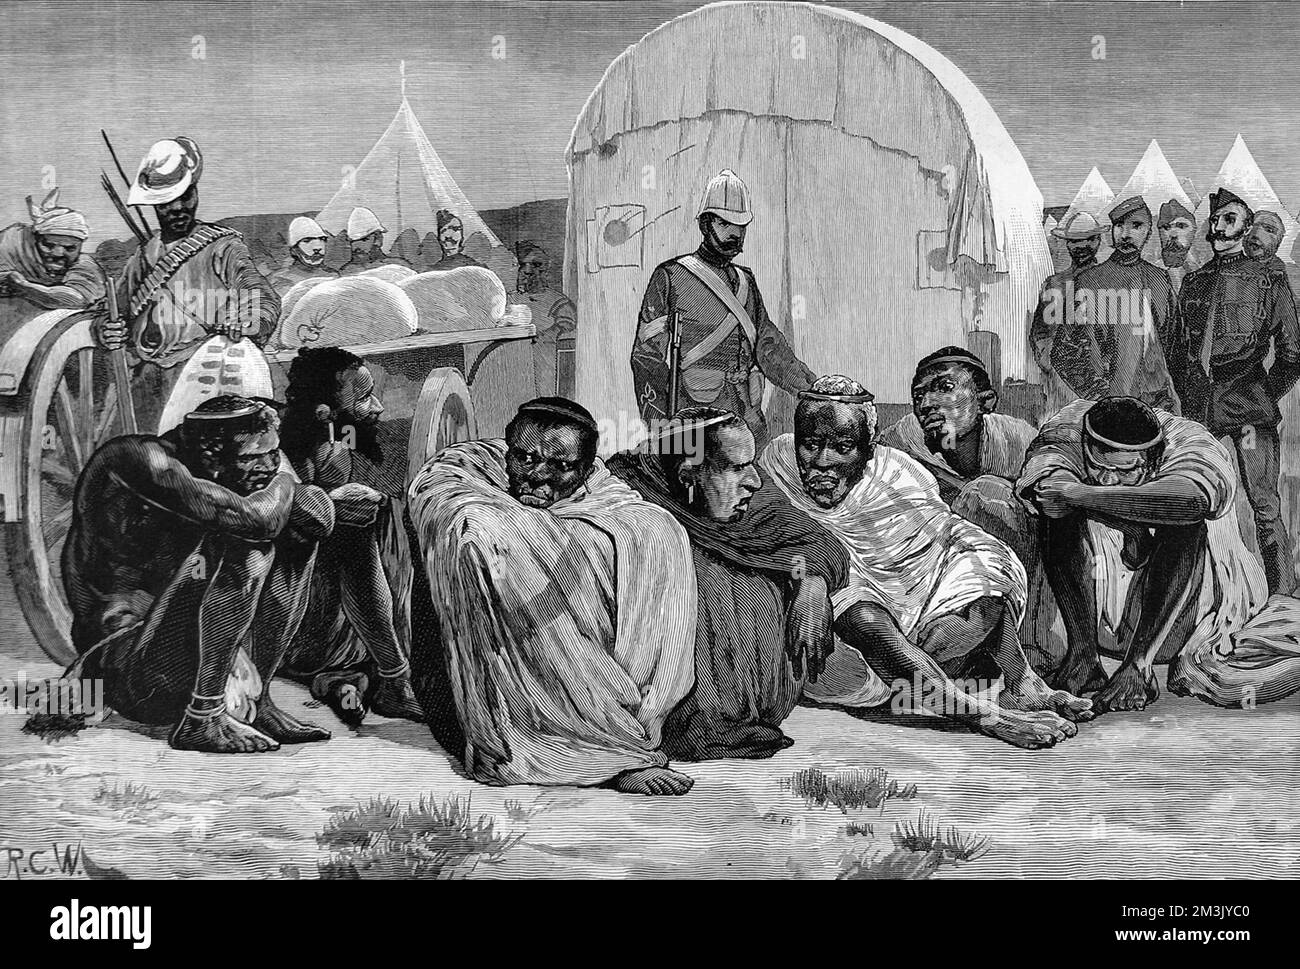 Zulu elders seated in the British army camp waiting to negotiate the end of hostilities in the Zulu wars. British troops and tents are seen in the background.     Date: 1879 Stock Photo